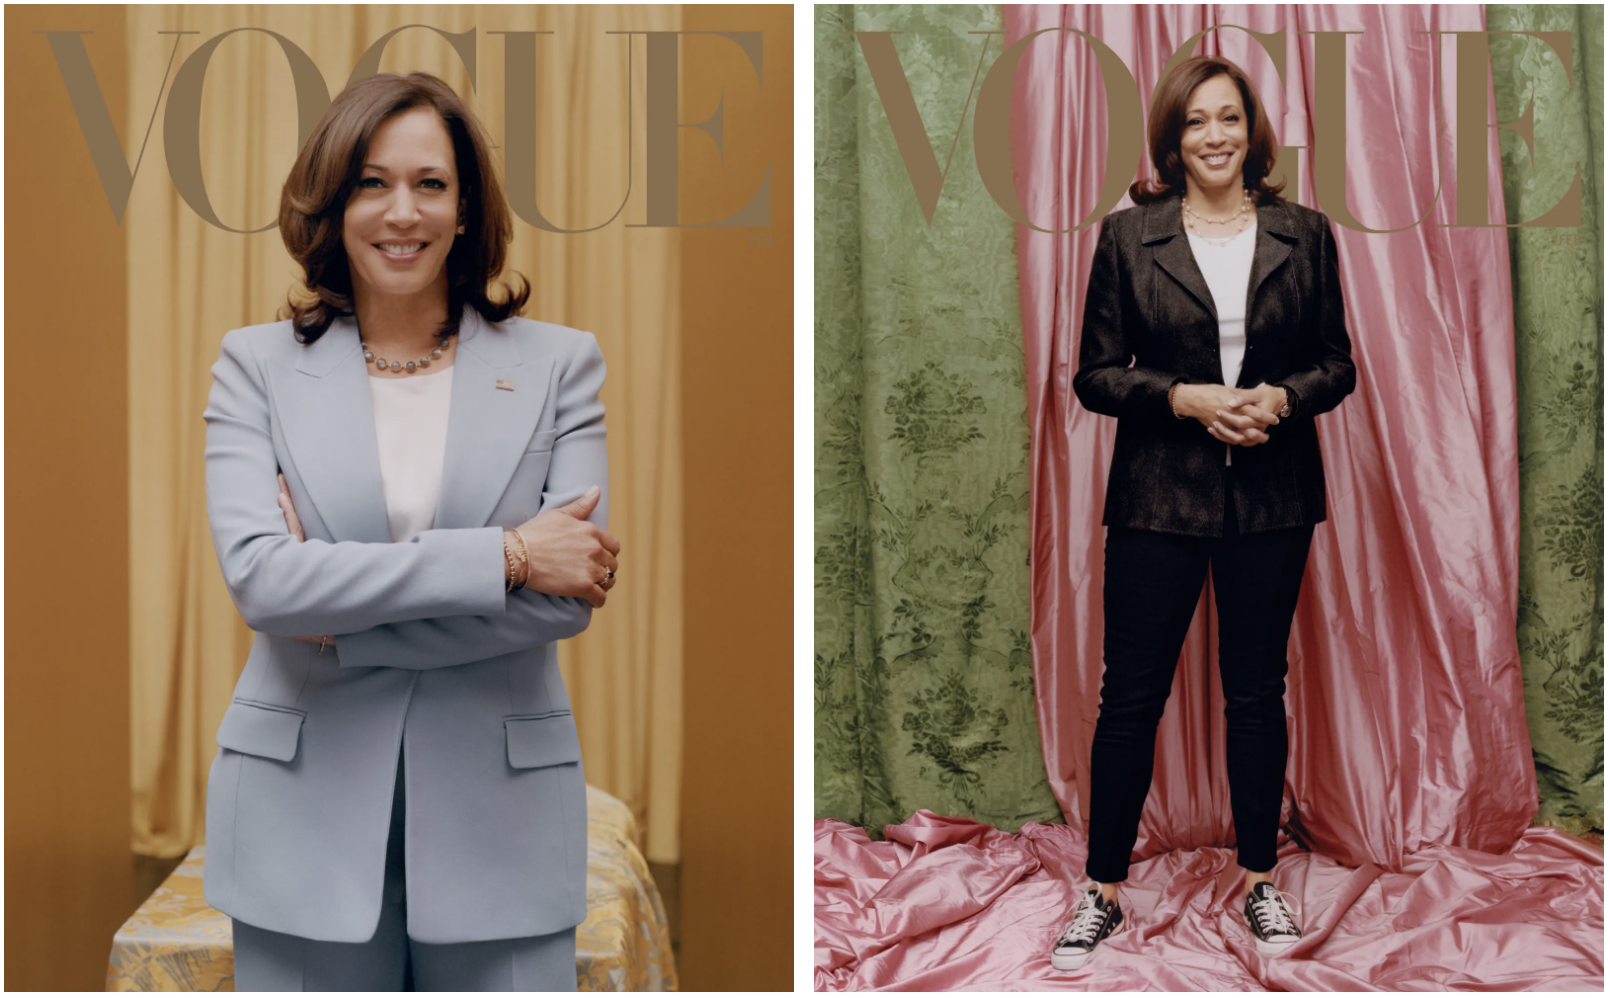 Digital and print covers of 'Vogue' featuring Kamala Harris (Vogue)